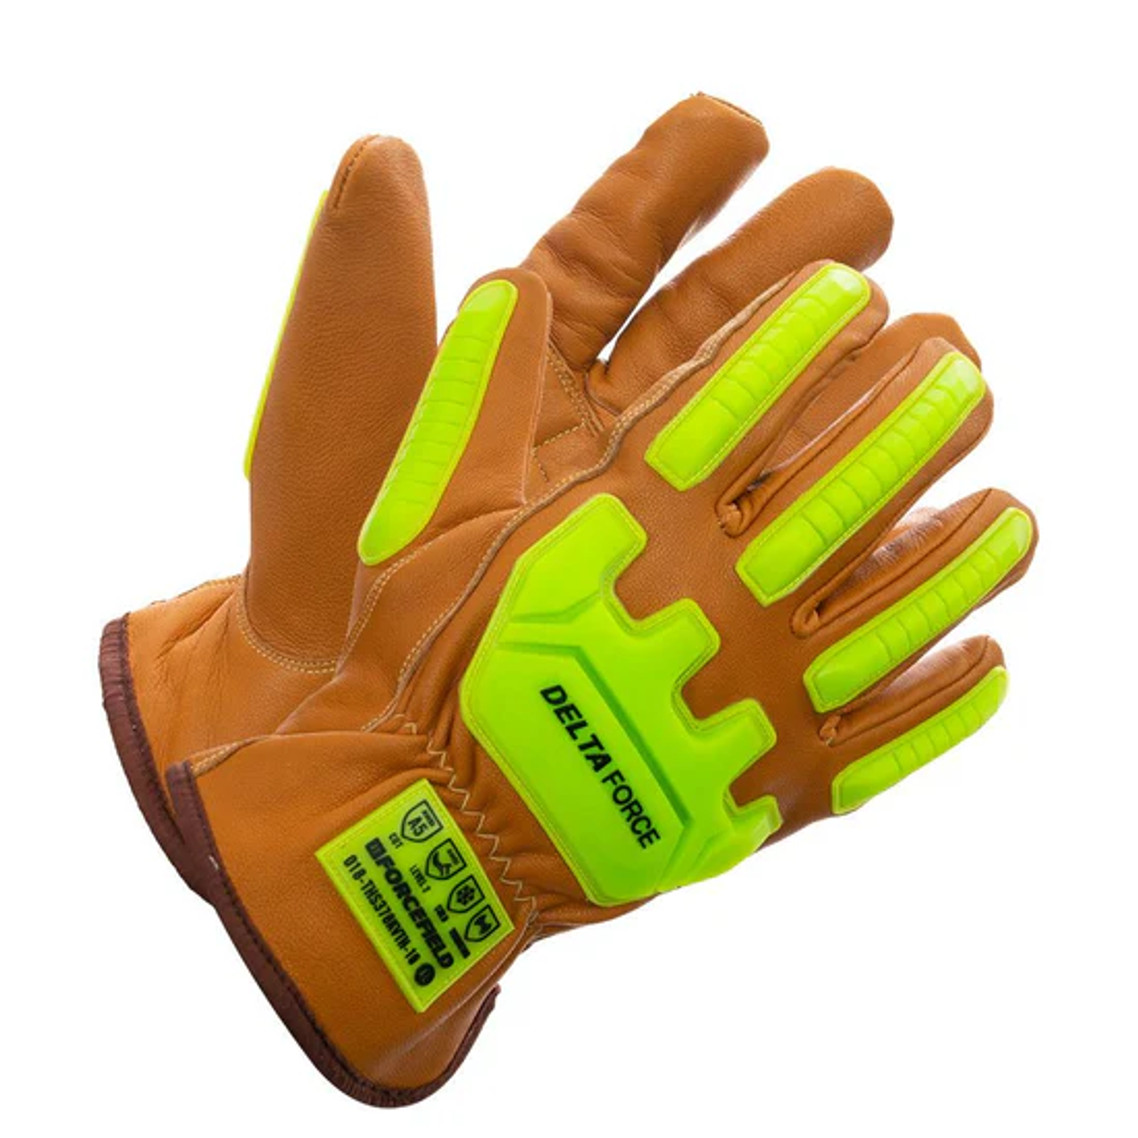 ForceField Deltaforce Goatskin Kevlar and Thinsulate Lined Winter Impact Glove (12 Pairs/Box) | SafetyApparel.ca